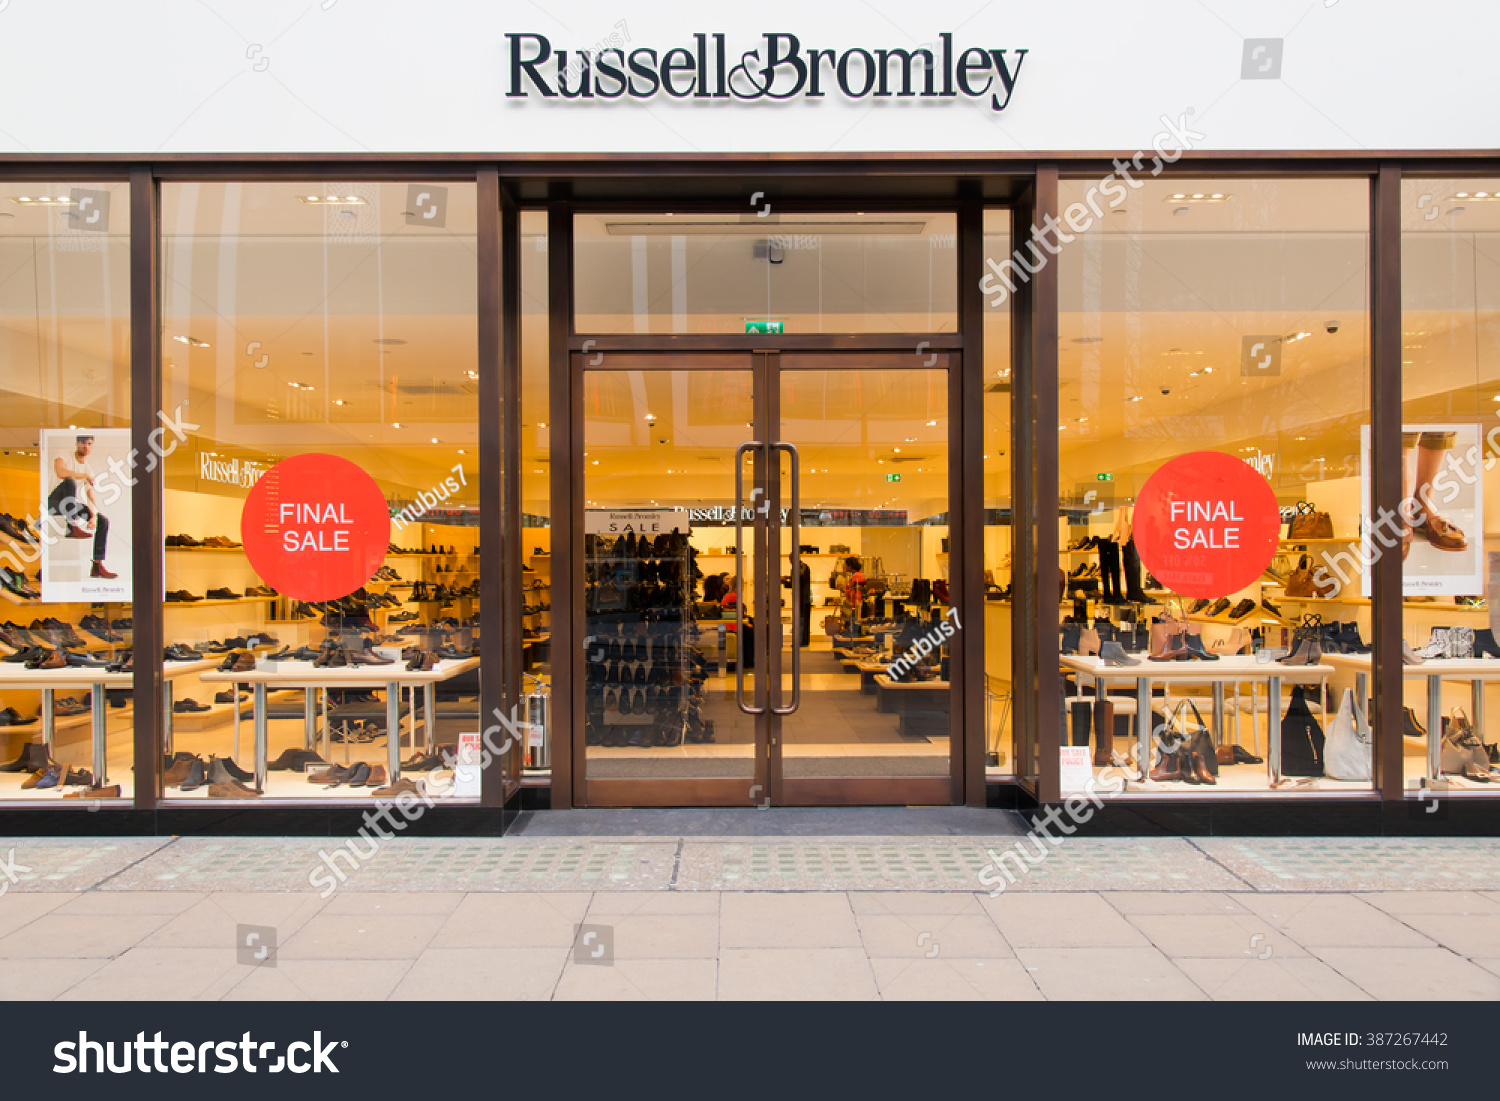 russell bromley uk